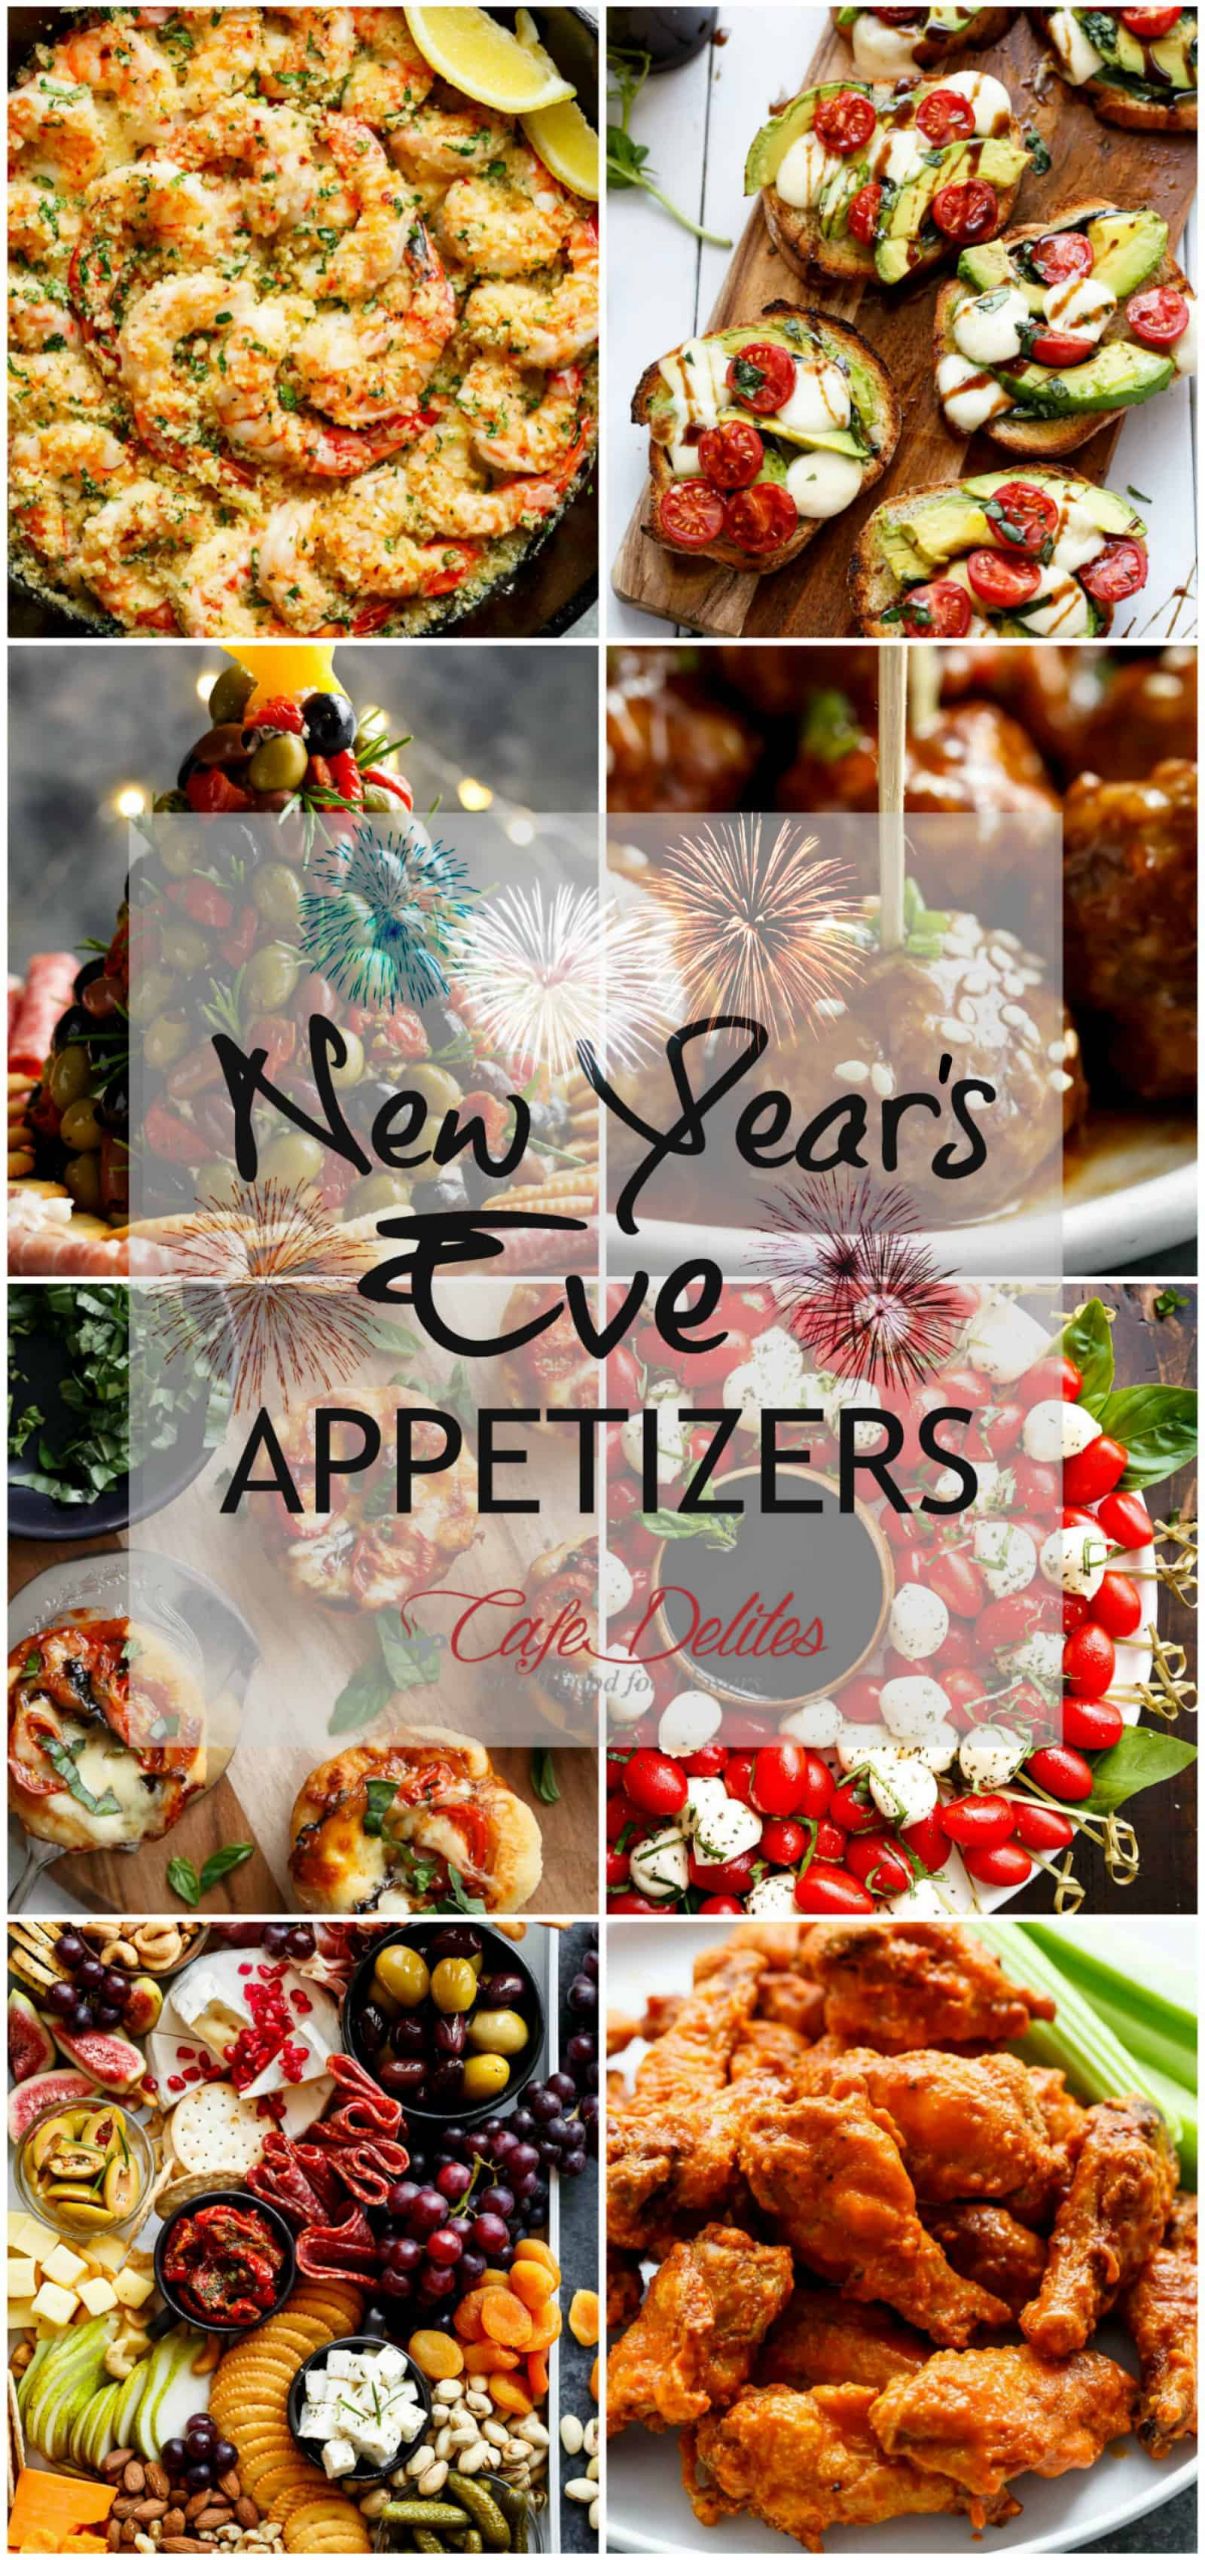 New Years Eve Appetizers
 The Best New Year s Eve Appetizers Cafe Delites